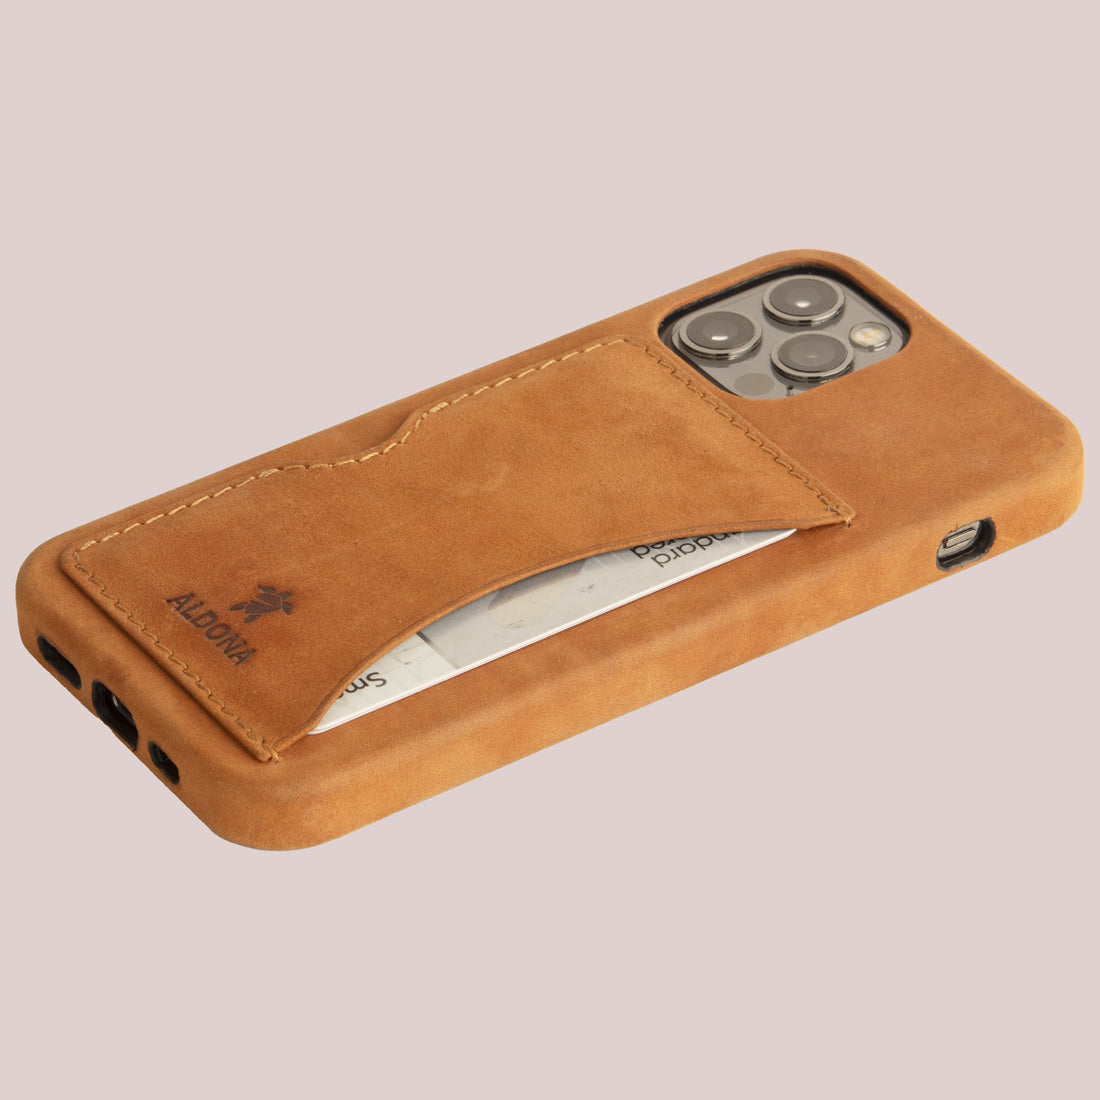 Baxter Card Case for iPhone 12 Pro Max - Vintage Tan